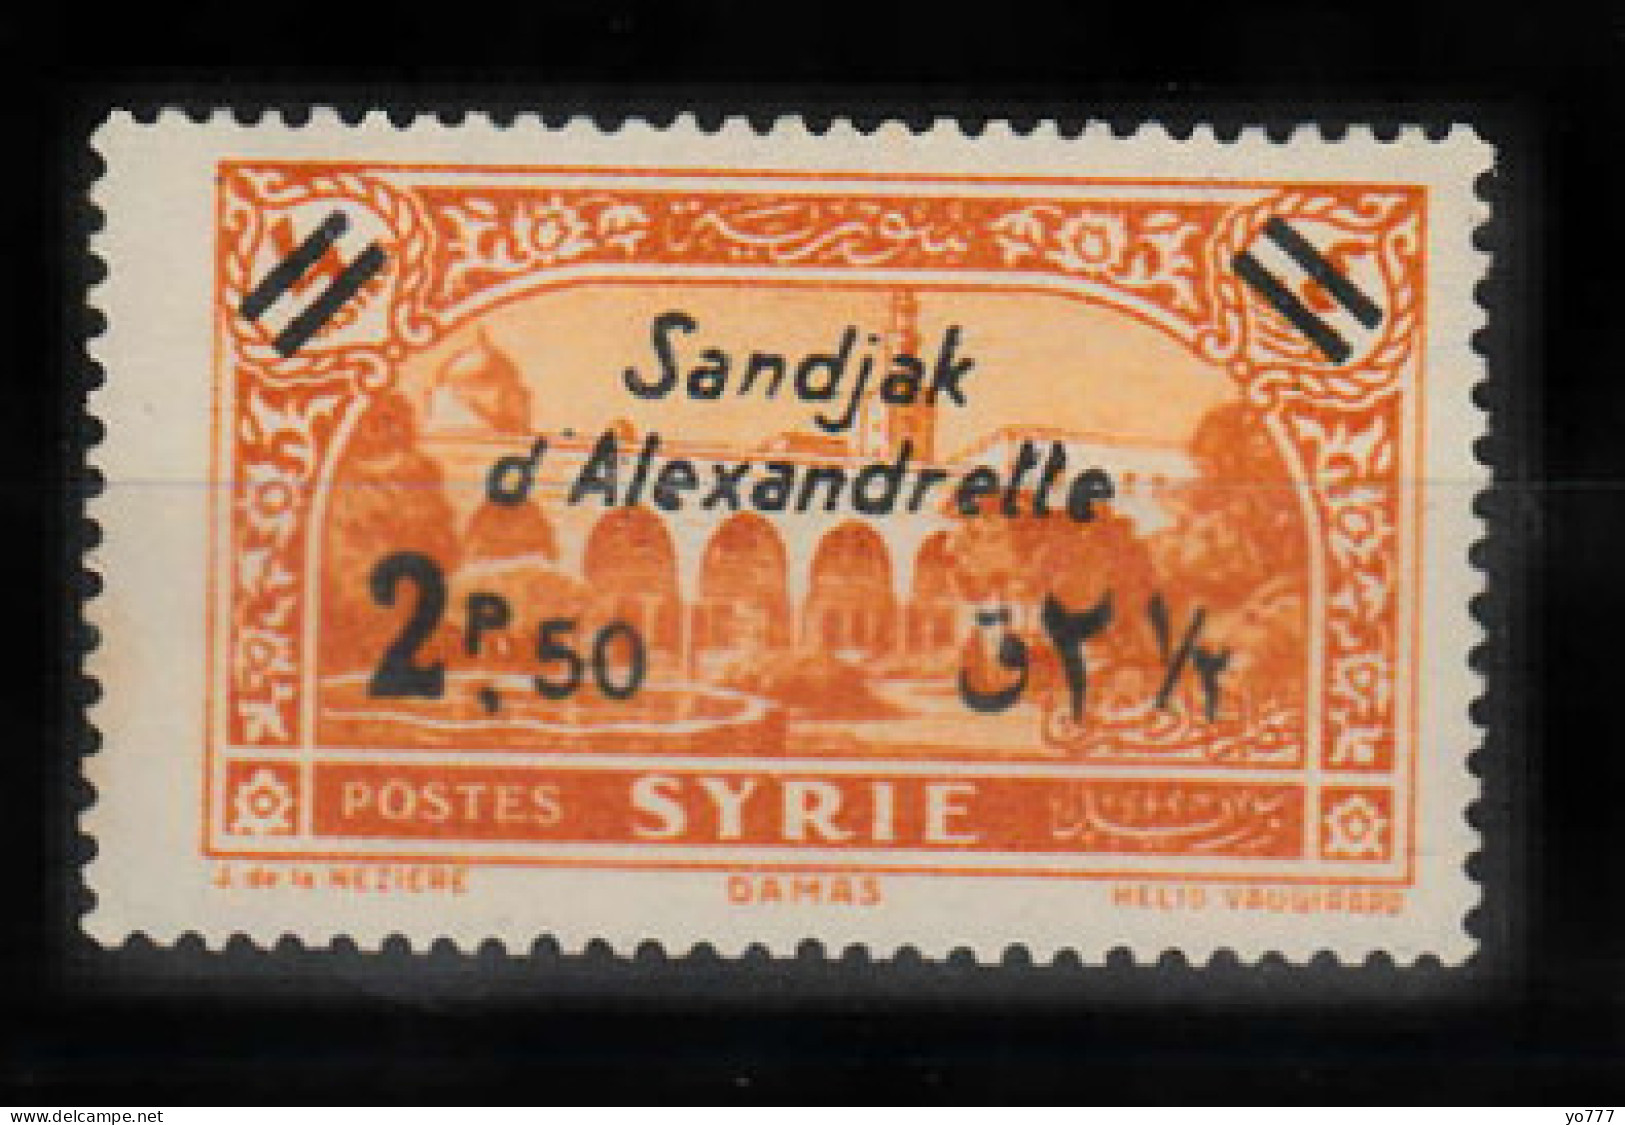 (H-011) 1938 HATAY STAMPS WITH BLACK SANDJAK D'ALEXANDRETTE SURCHARGE ON SYRIA POSTAGE AIRPOST STAMPS MH* NO GUM - 1934-39 Sandjak D'Alexandrette & Hatay